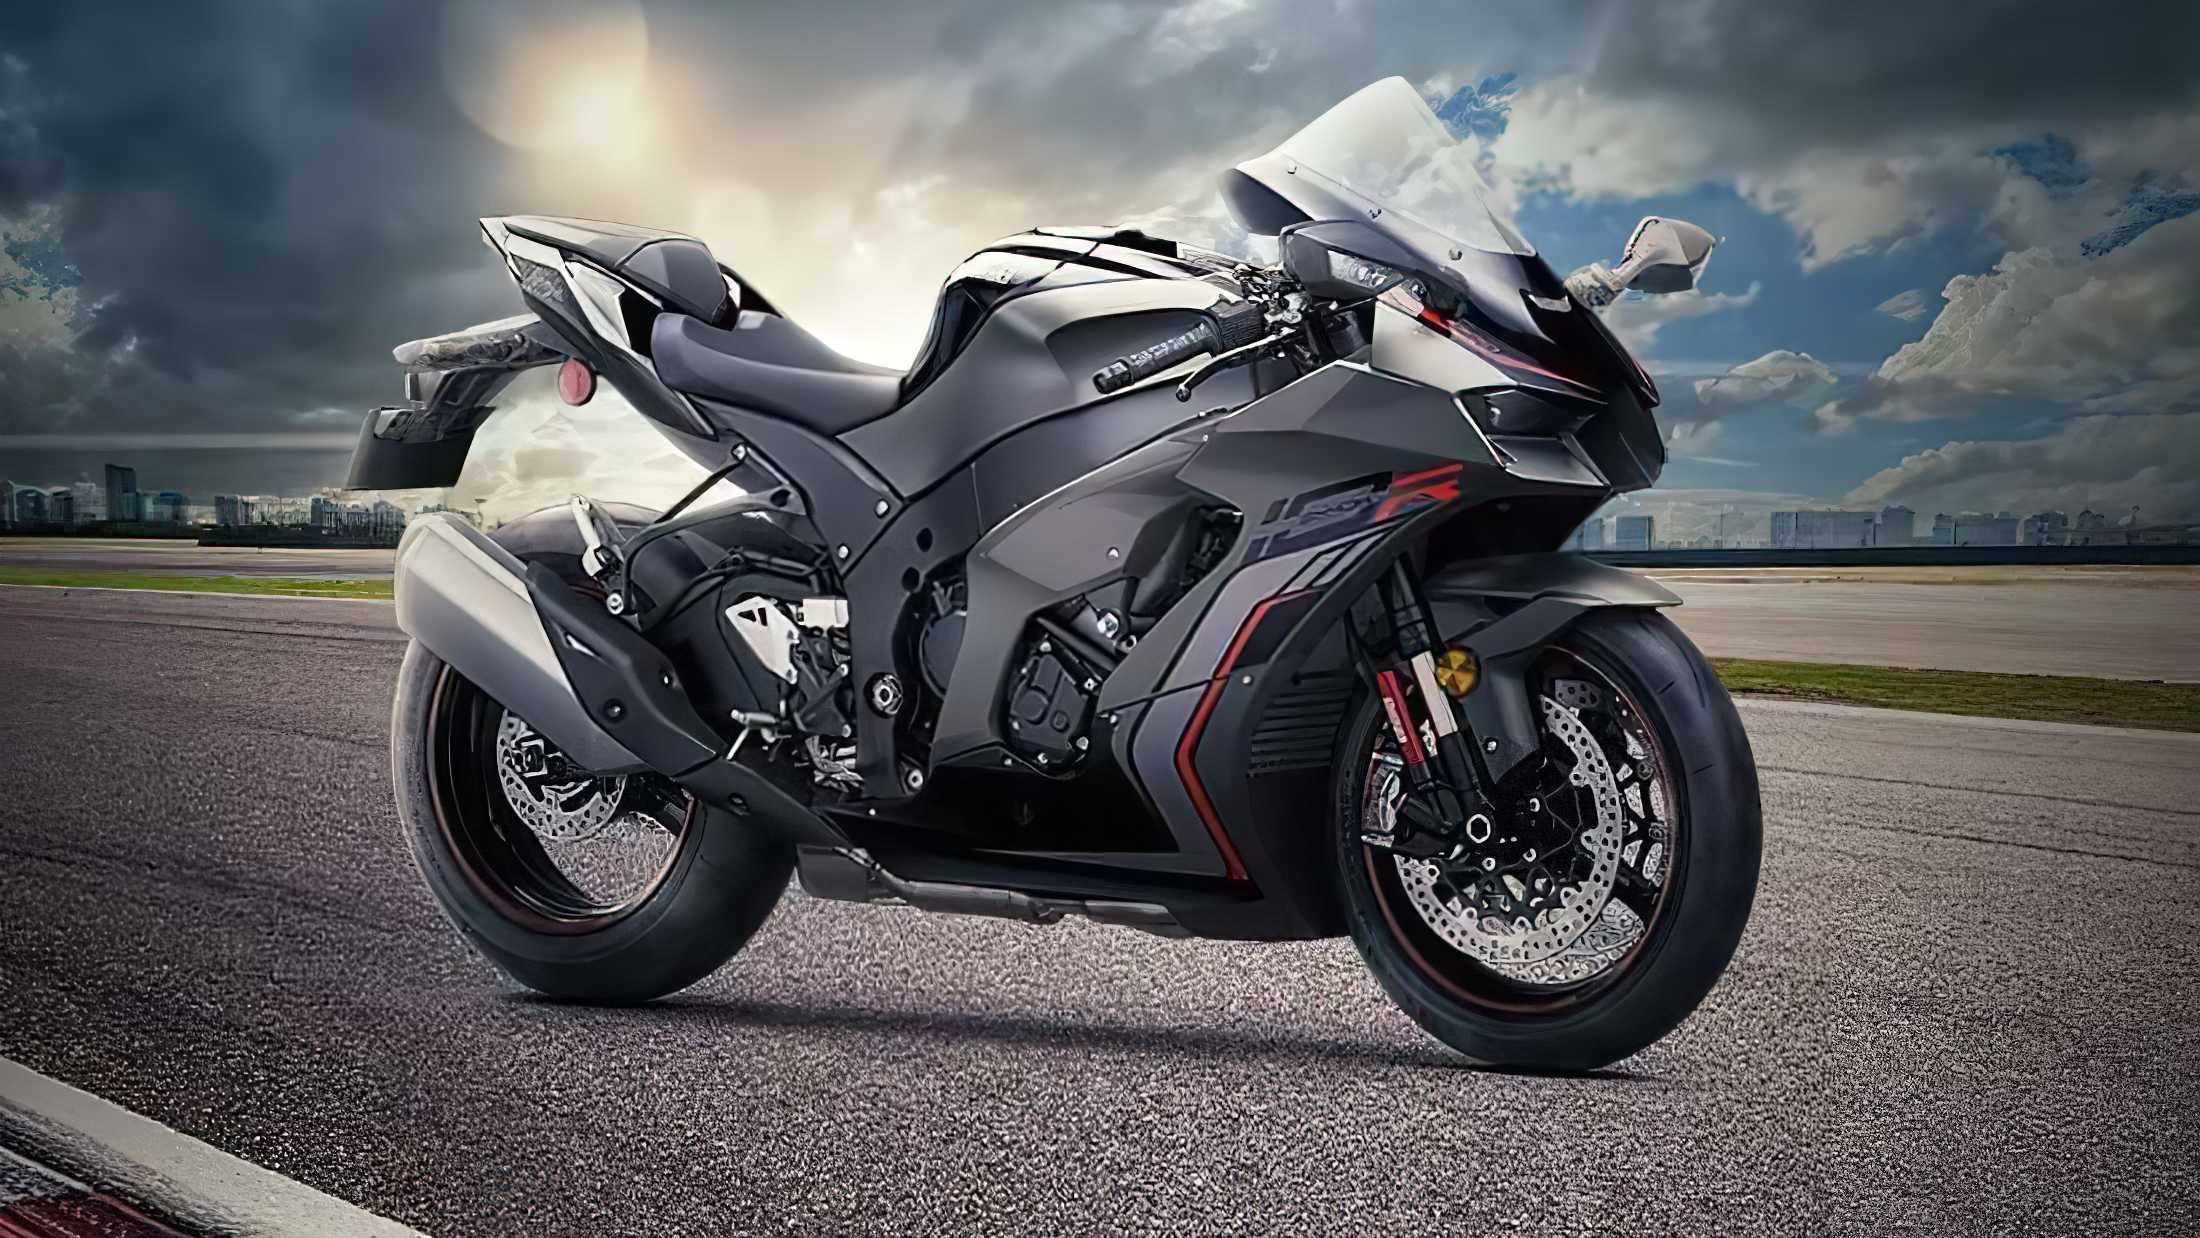 USA - Kawasaki ZX-10R presented in new color
- also in the MOTORCYCLES.NEWS APP